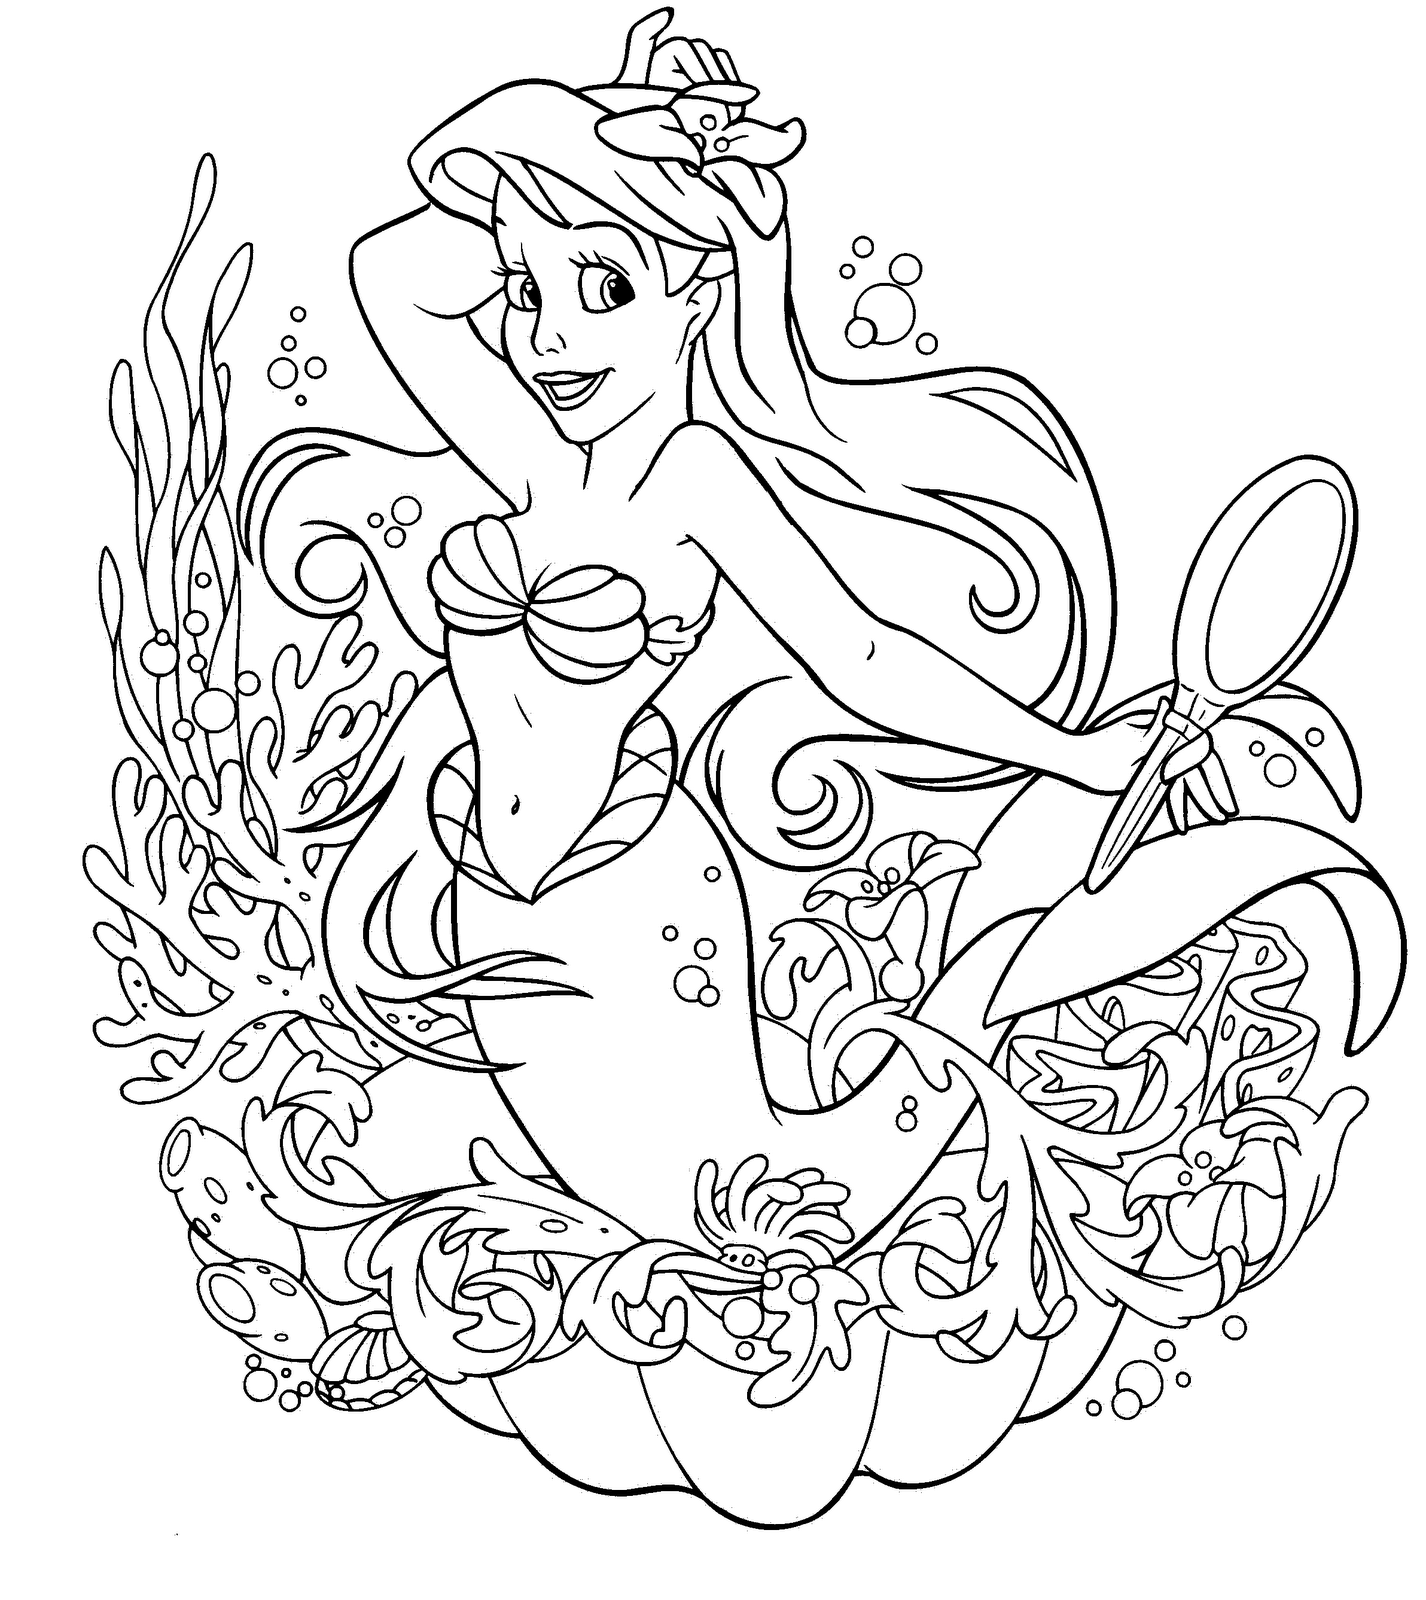 disney little mermaid coloring pages the little mermaid scuttle coloring pages images amp coloring disney mermaid pages little 